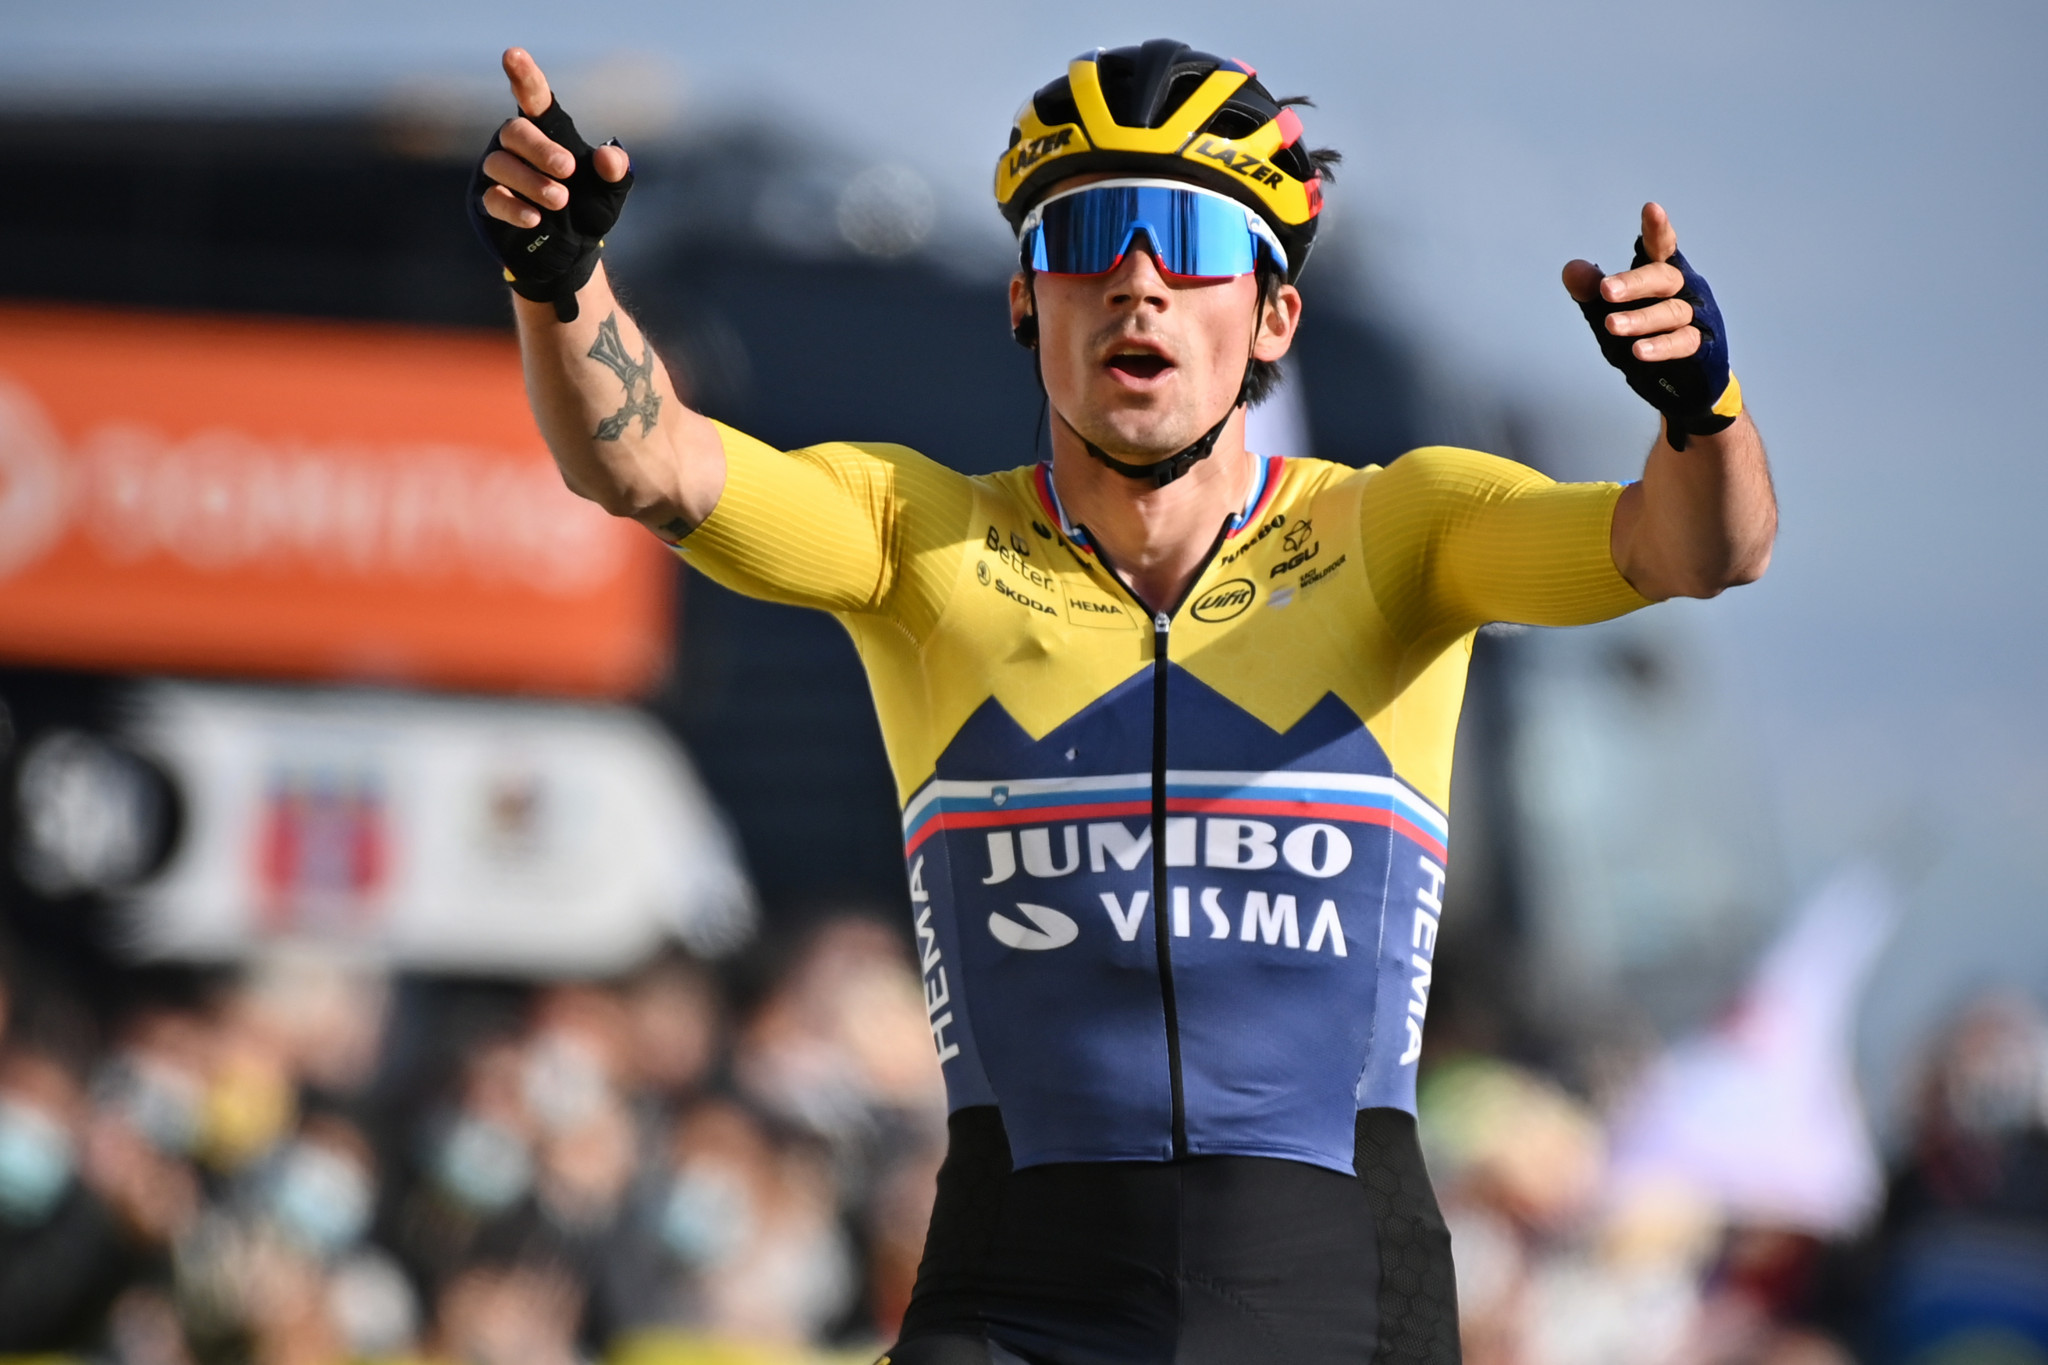 Roglič takes over lead with stage four win at Paris-Nice on Chiroubles